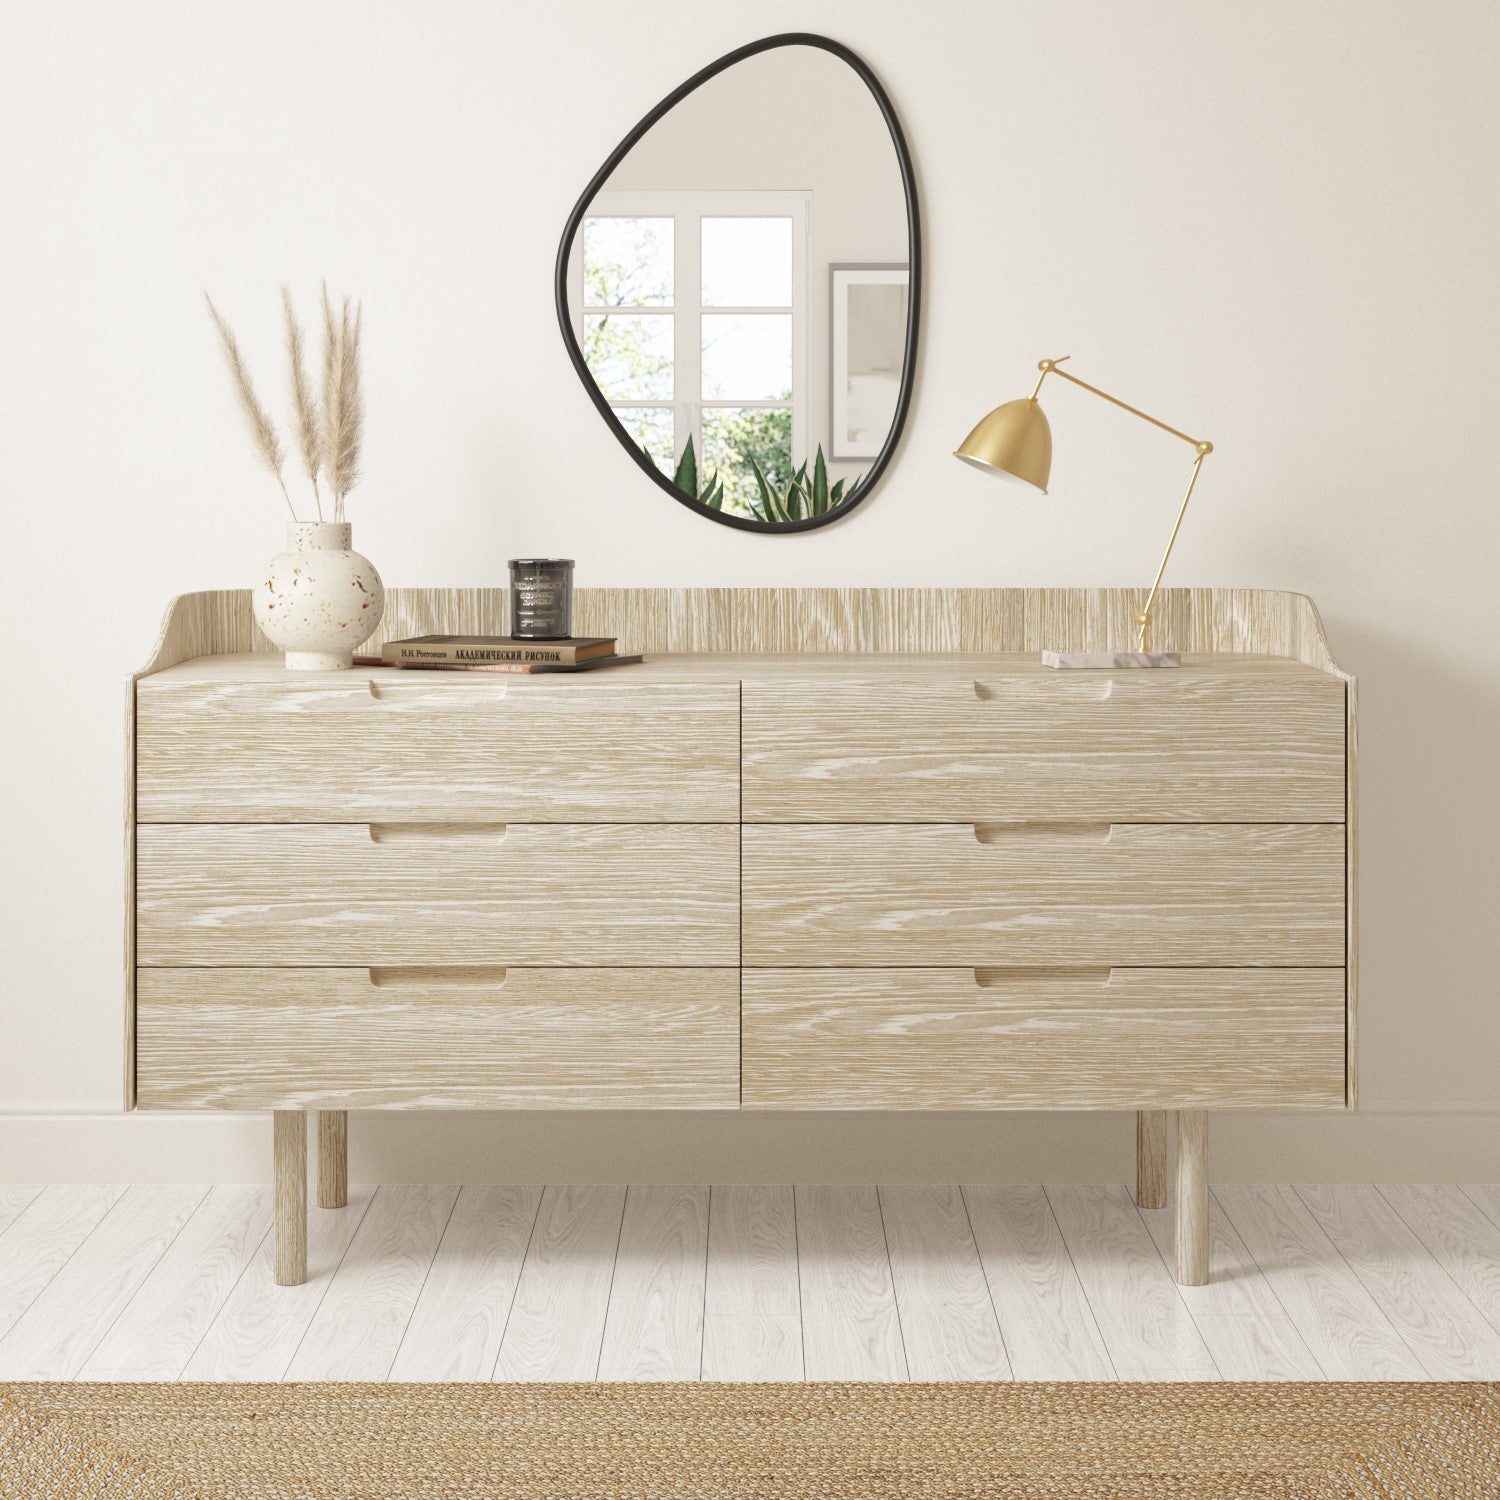 MALMÖ | CHEST OF DRAWERS